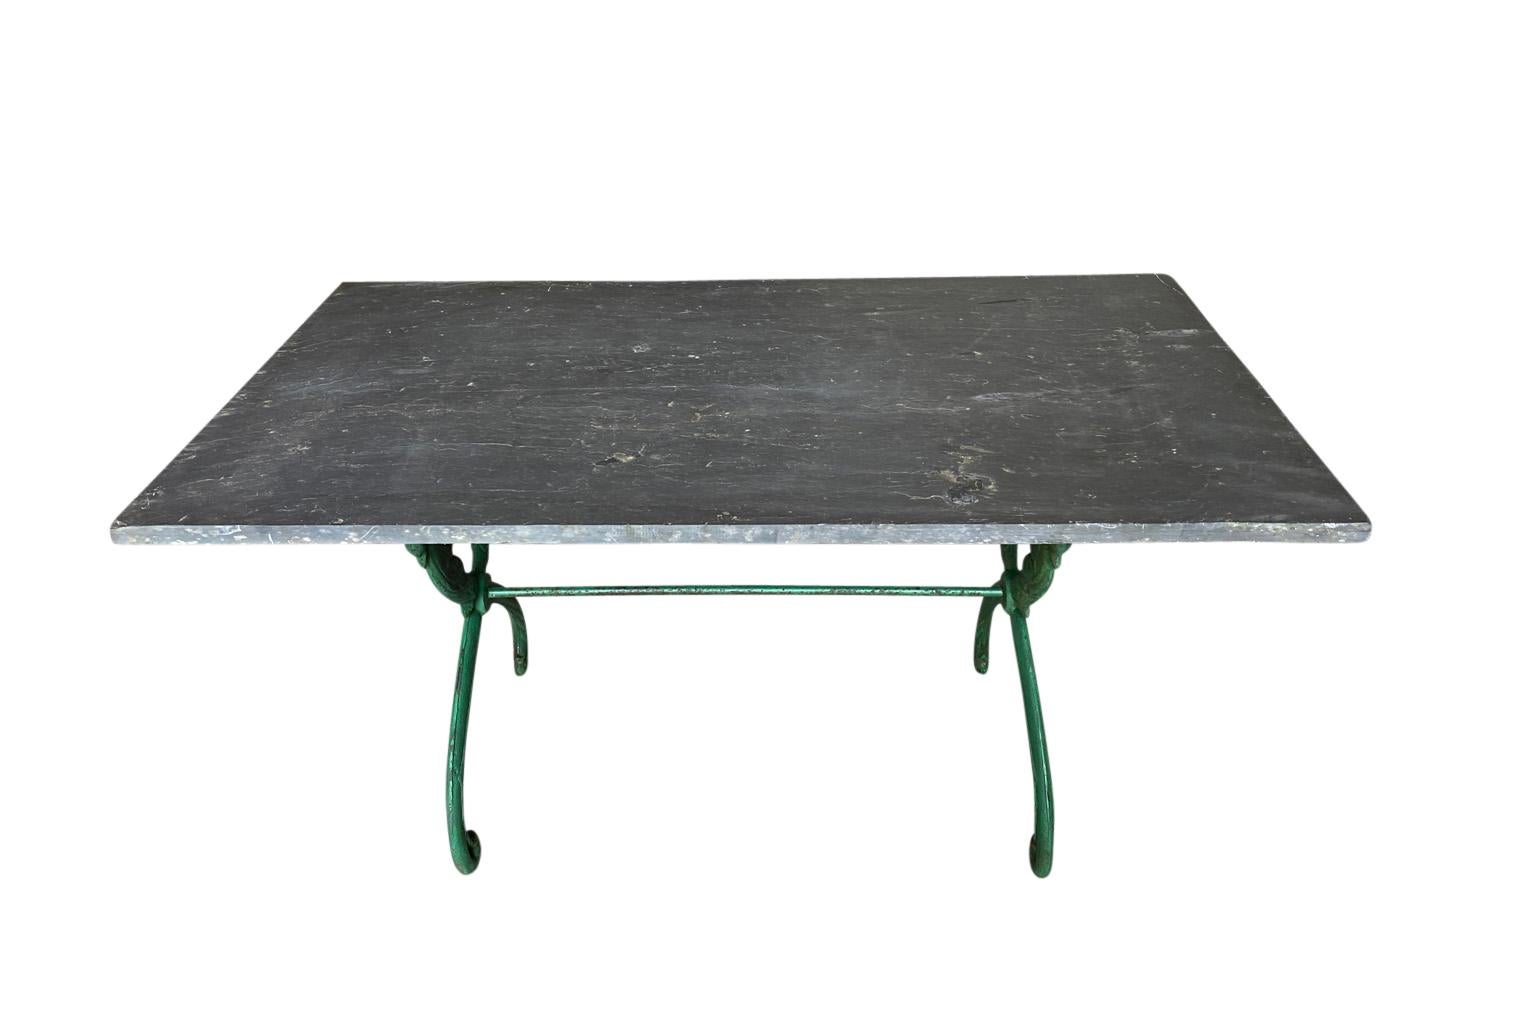 Painted Late 19th Century French Garden Table